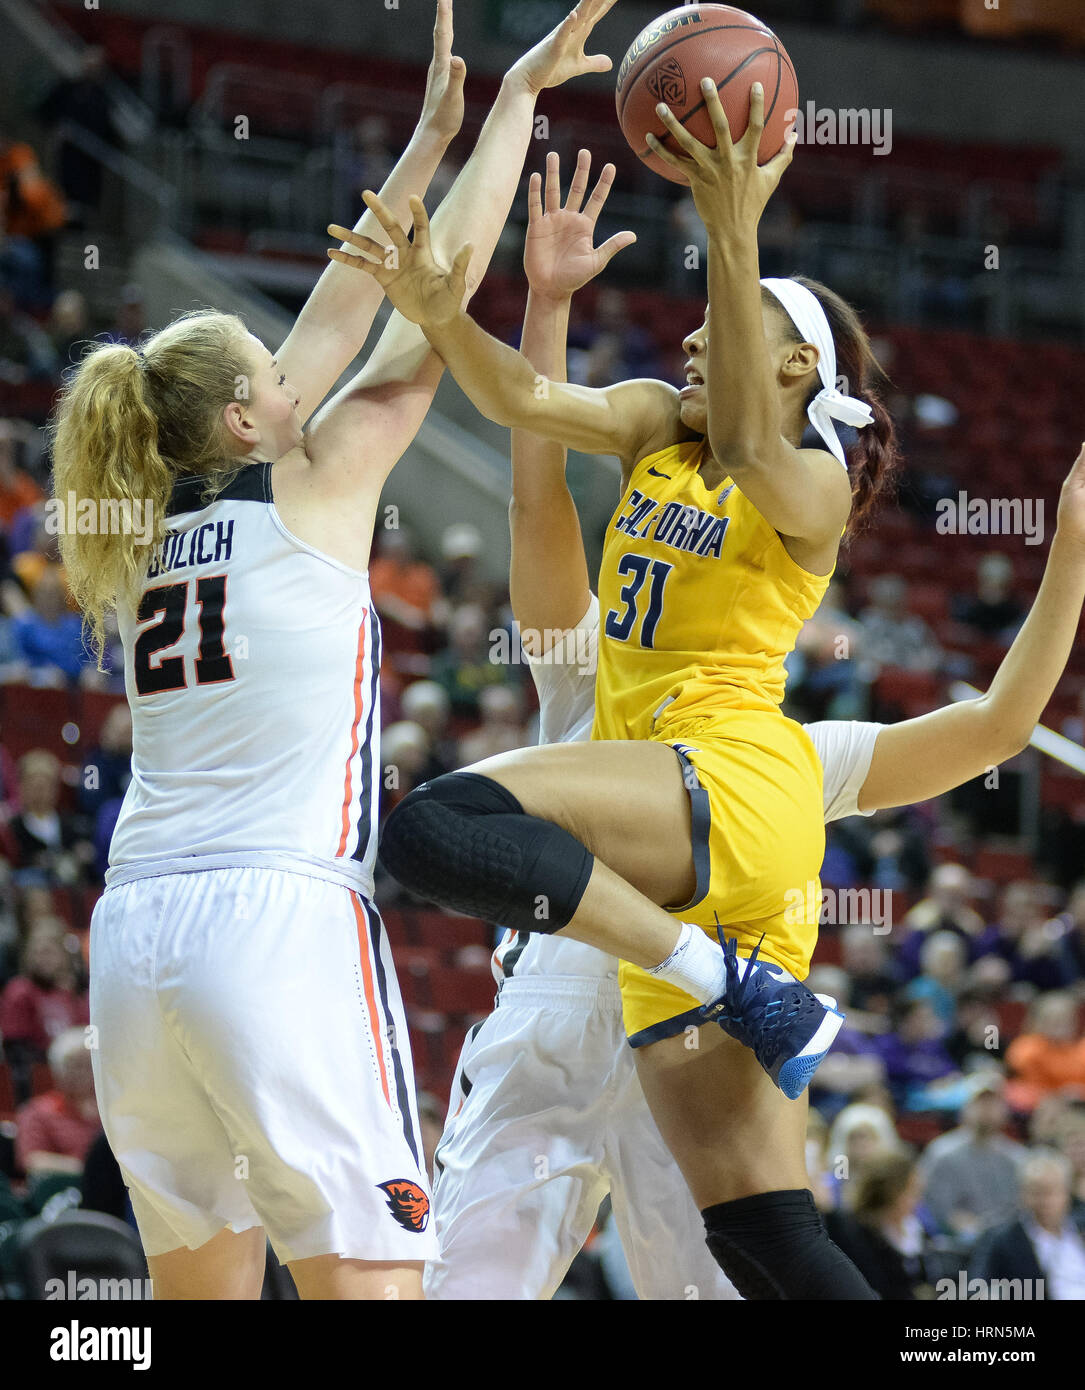 Seattle, WA, USA. 3rd Mar, 2017. Cal forward Kristine Anigwe (31) drives to the hoop against OSU center Marie Gulich (21) during a PAC12 women's tournament game between the Oregon State Beavers and the Cal Bears. OSU won the game 65-49. The game was played at Key Arena in Seattle, WA. Jeff Halstead/CSM/Alamy Live News Stock Photo